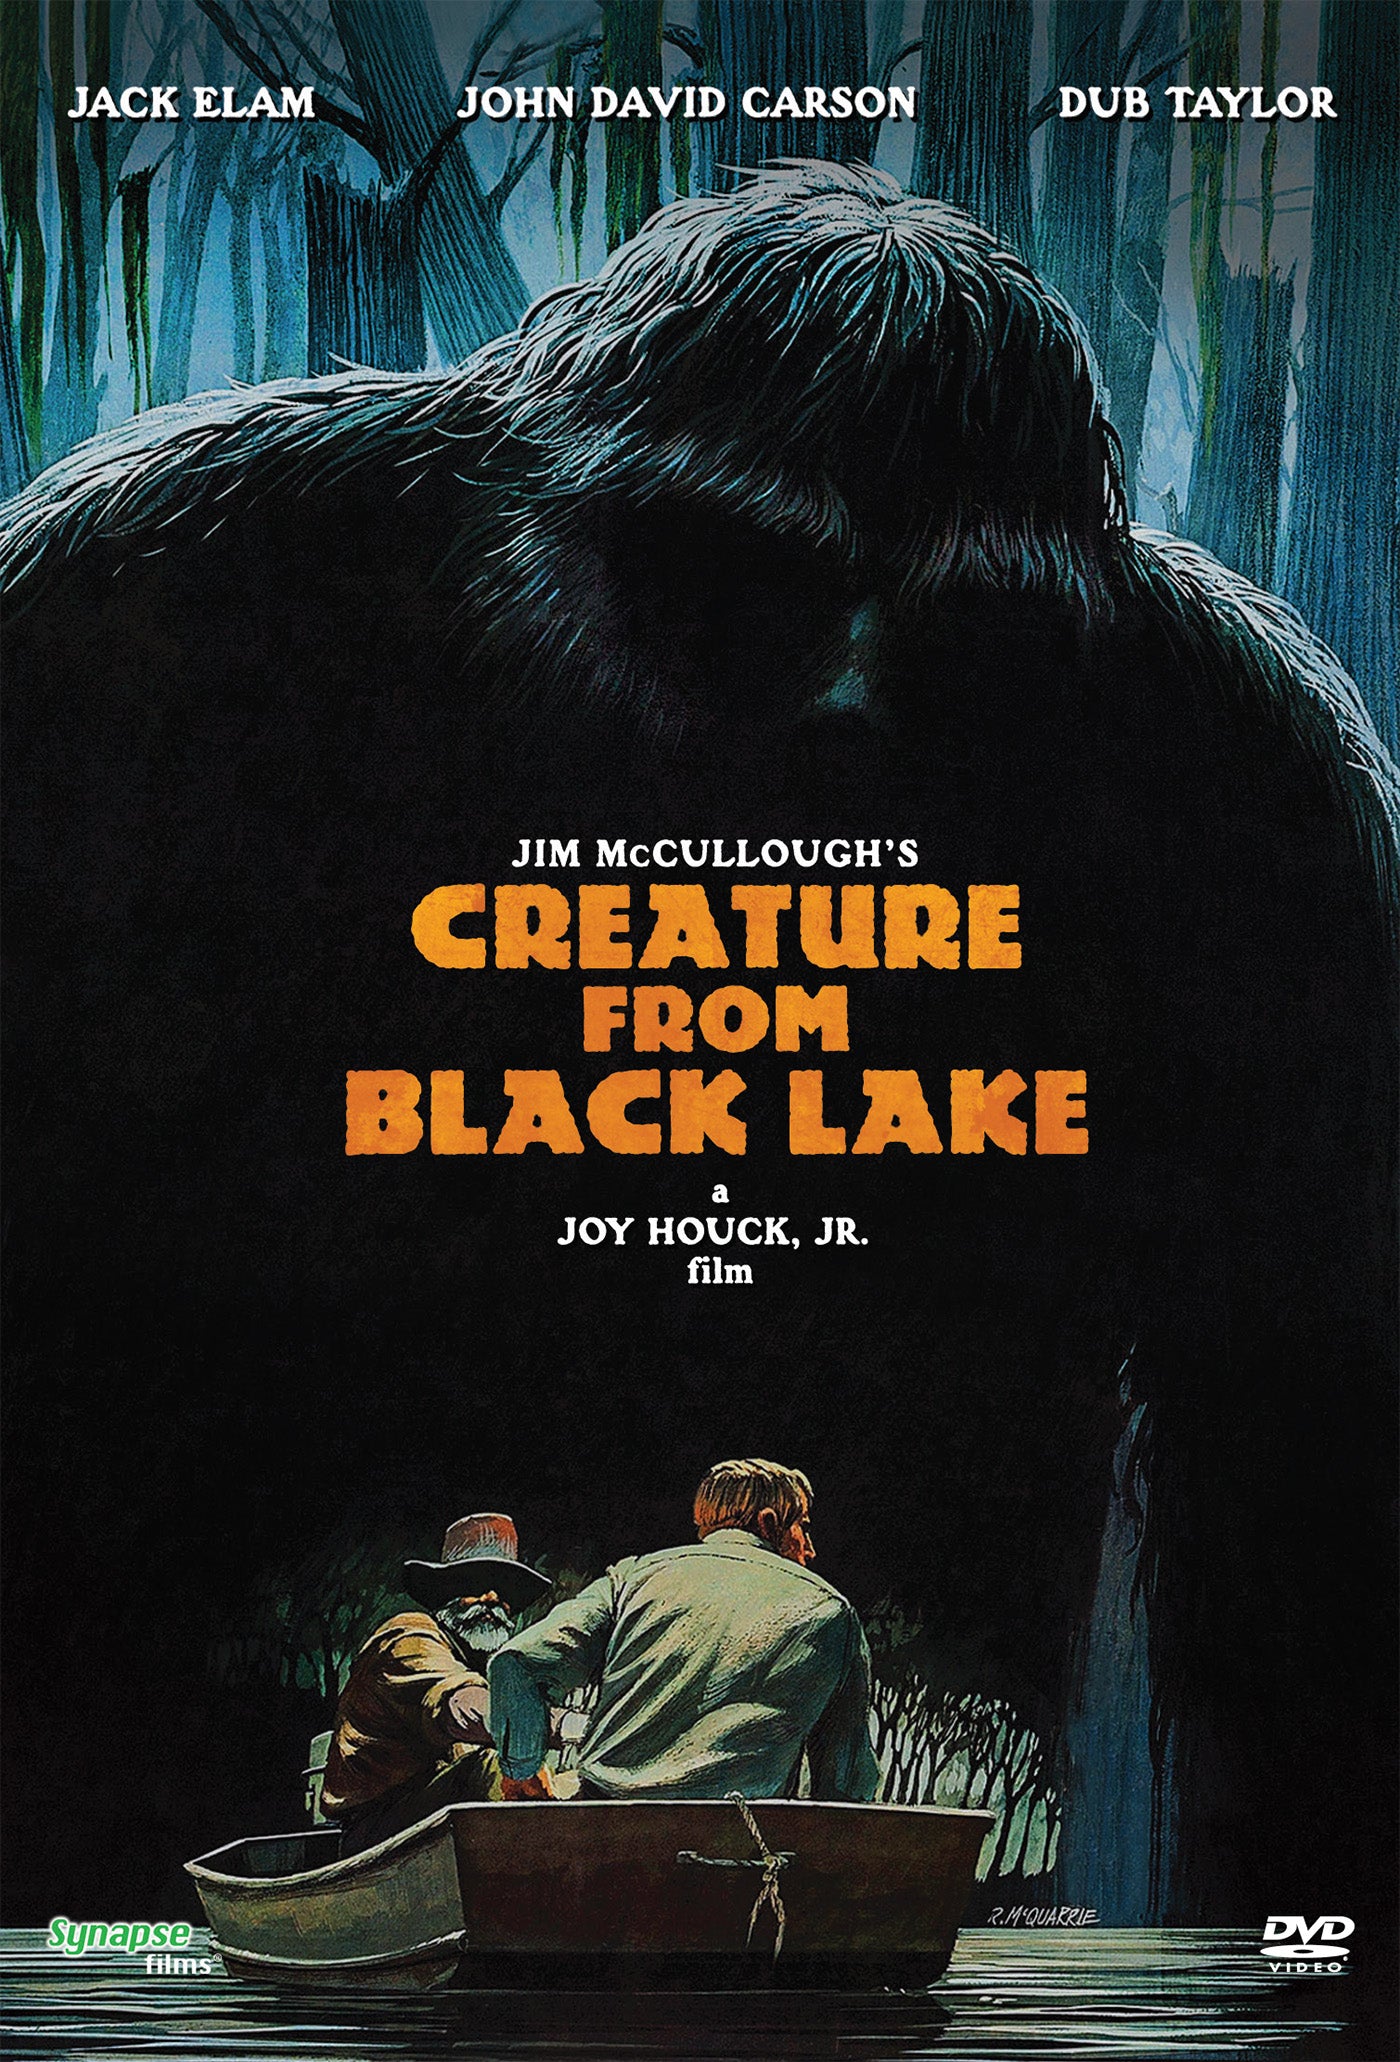 CREATURE FROM BLACK LAKE DVD